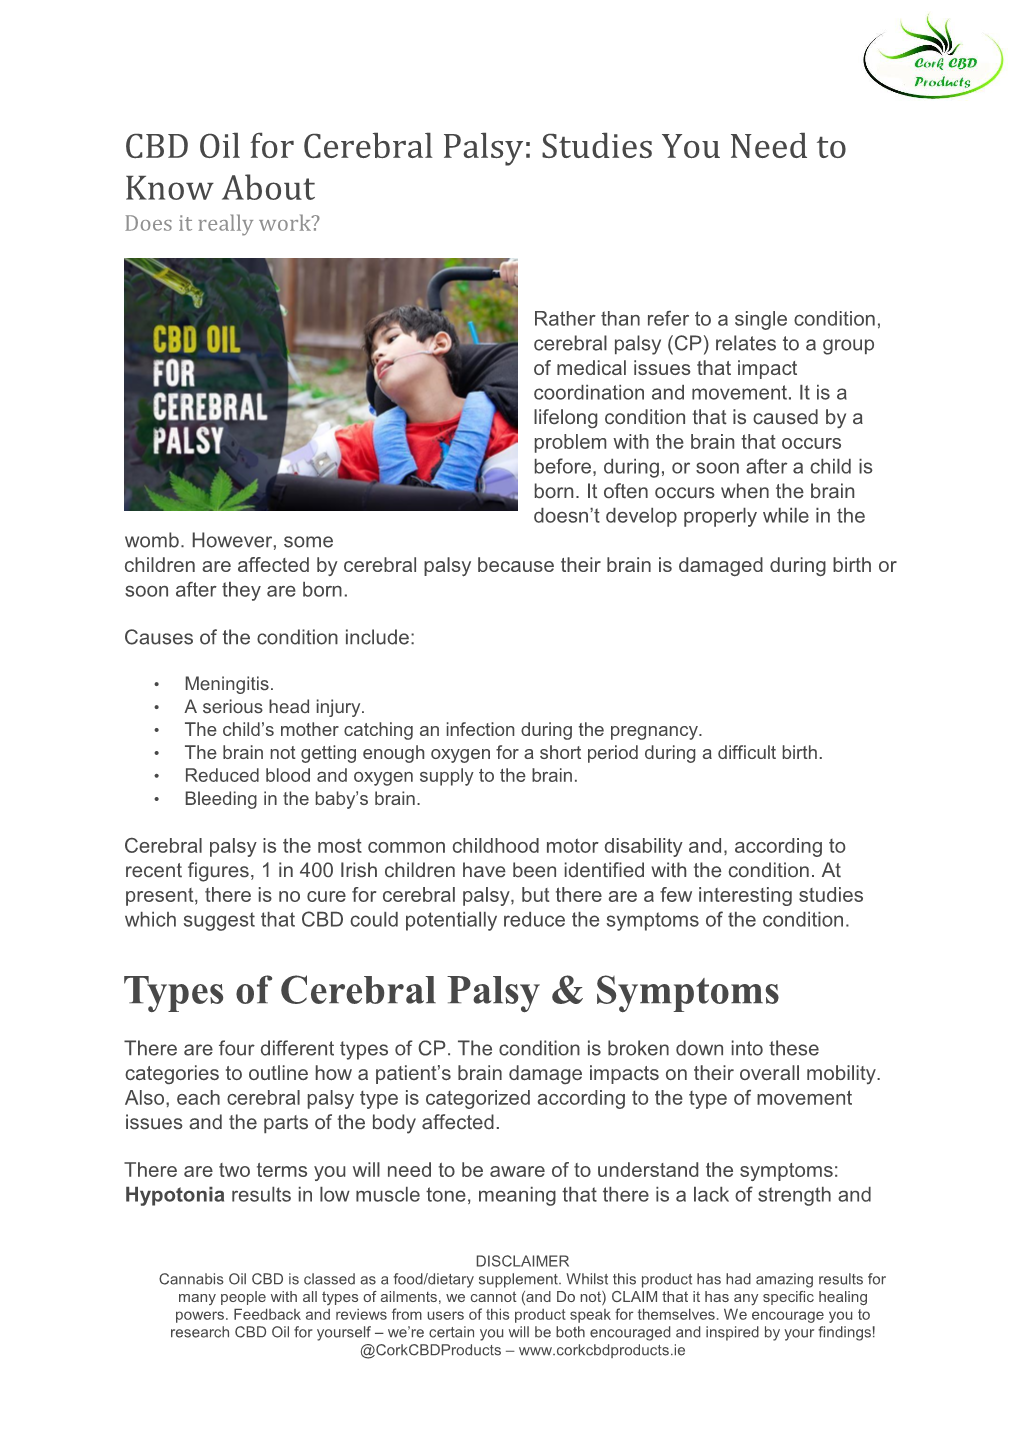 CBD Oil for Cerebral Palsy: Studies You Need to Know About Does It Really Work?